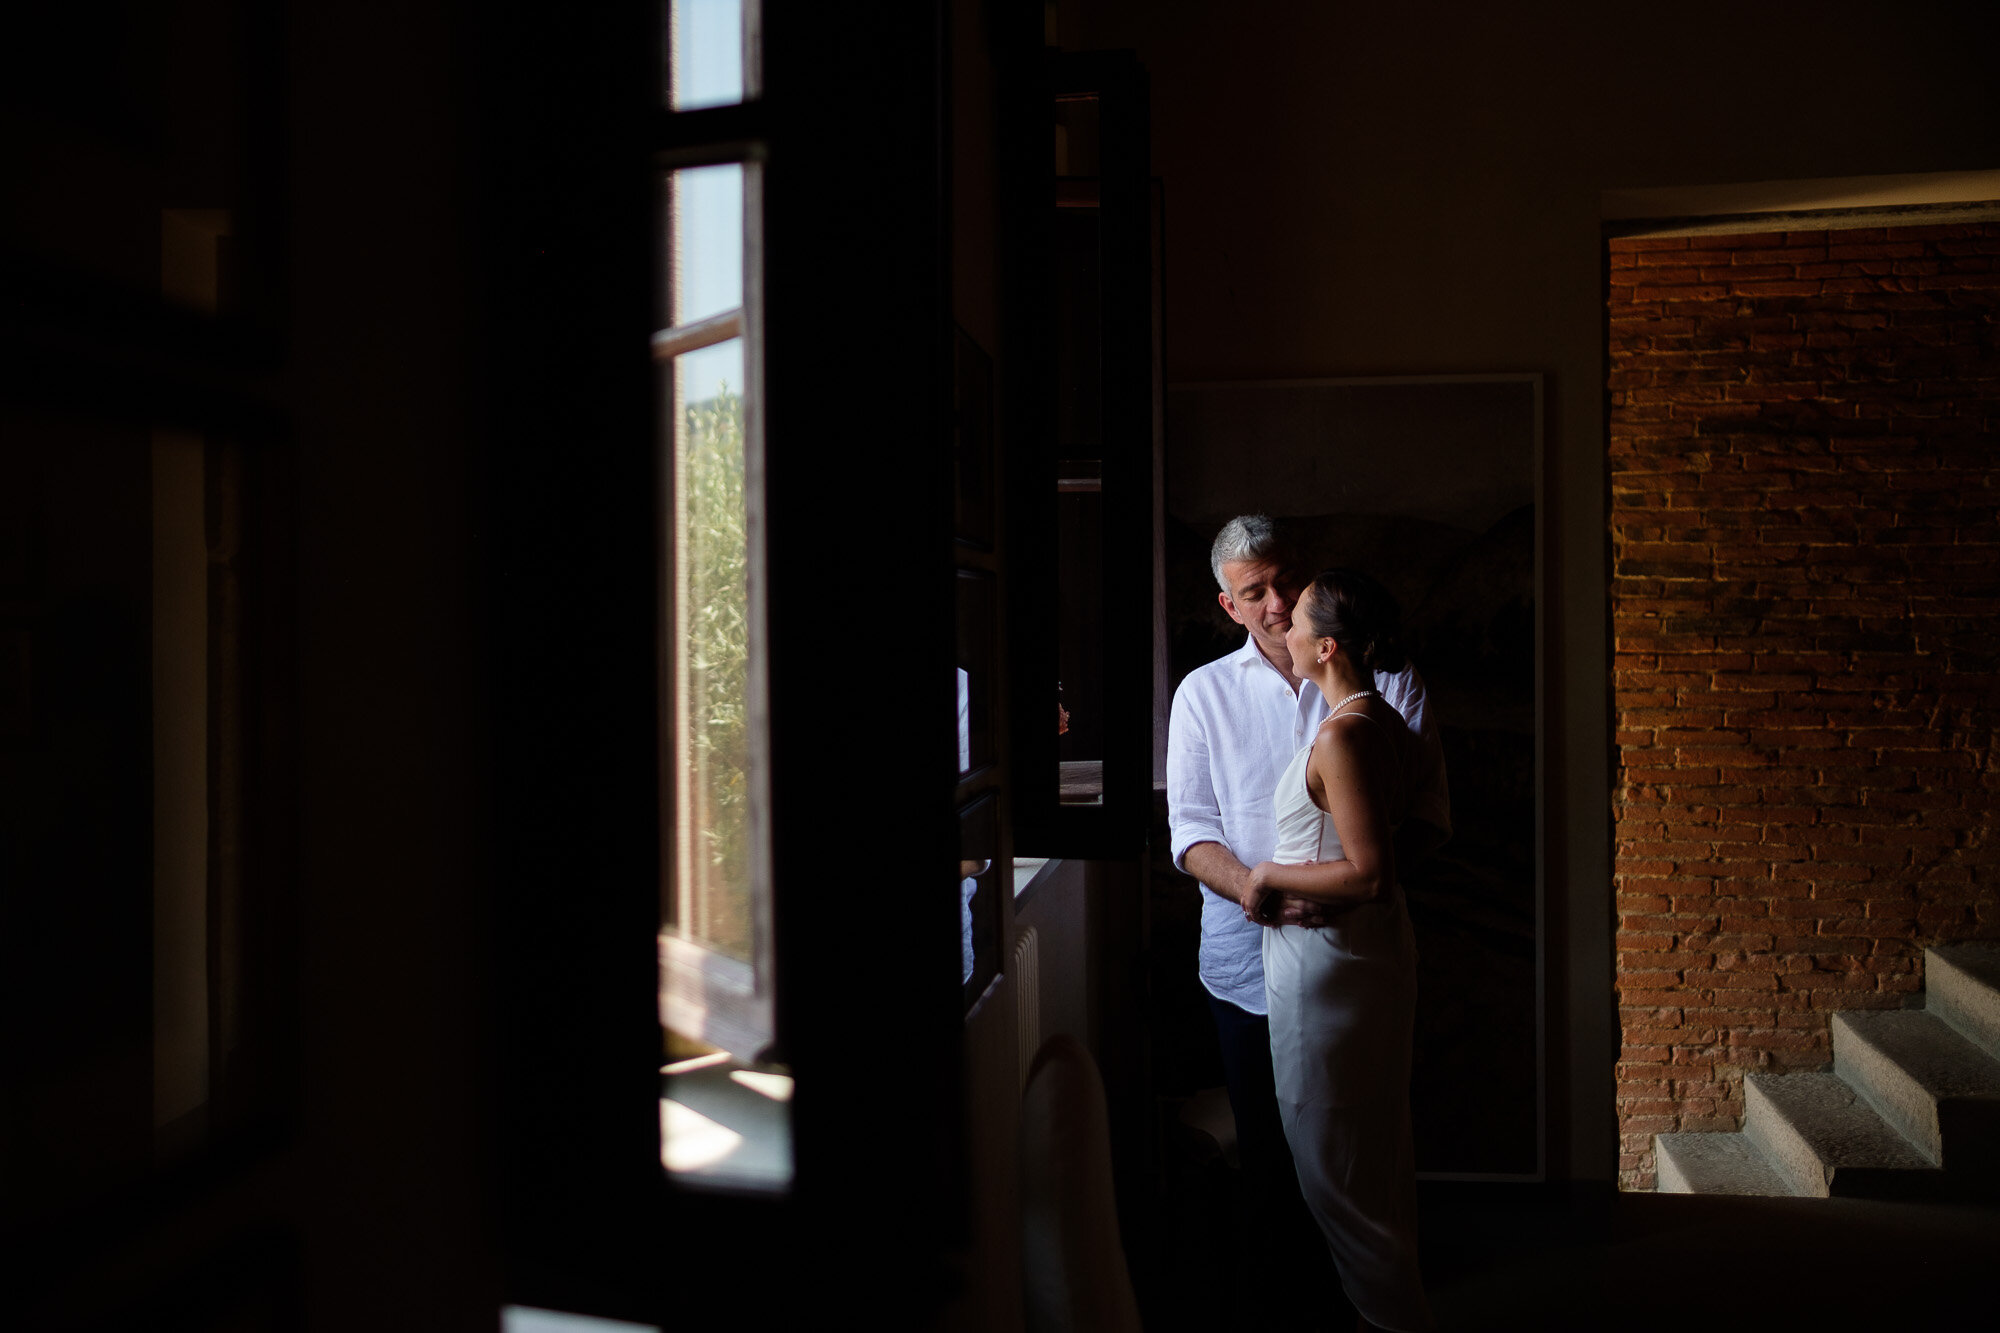  Elena and Steve pose for a portrait at the villa La Sorgente Di Francesca after their civil wedding ceremony at city hall in Pontassieve during their Tuscany destination wedding by wedding photographer Scott Williams 